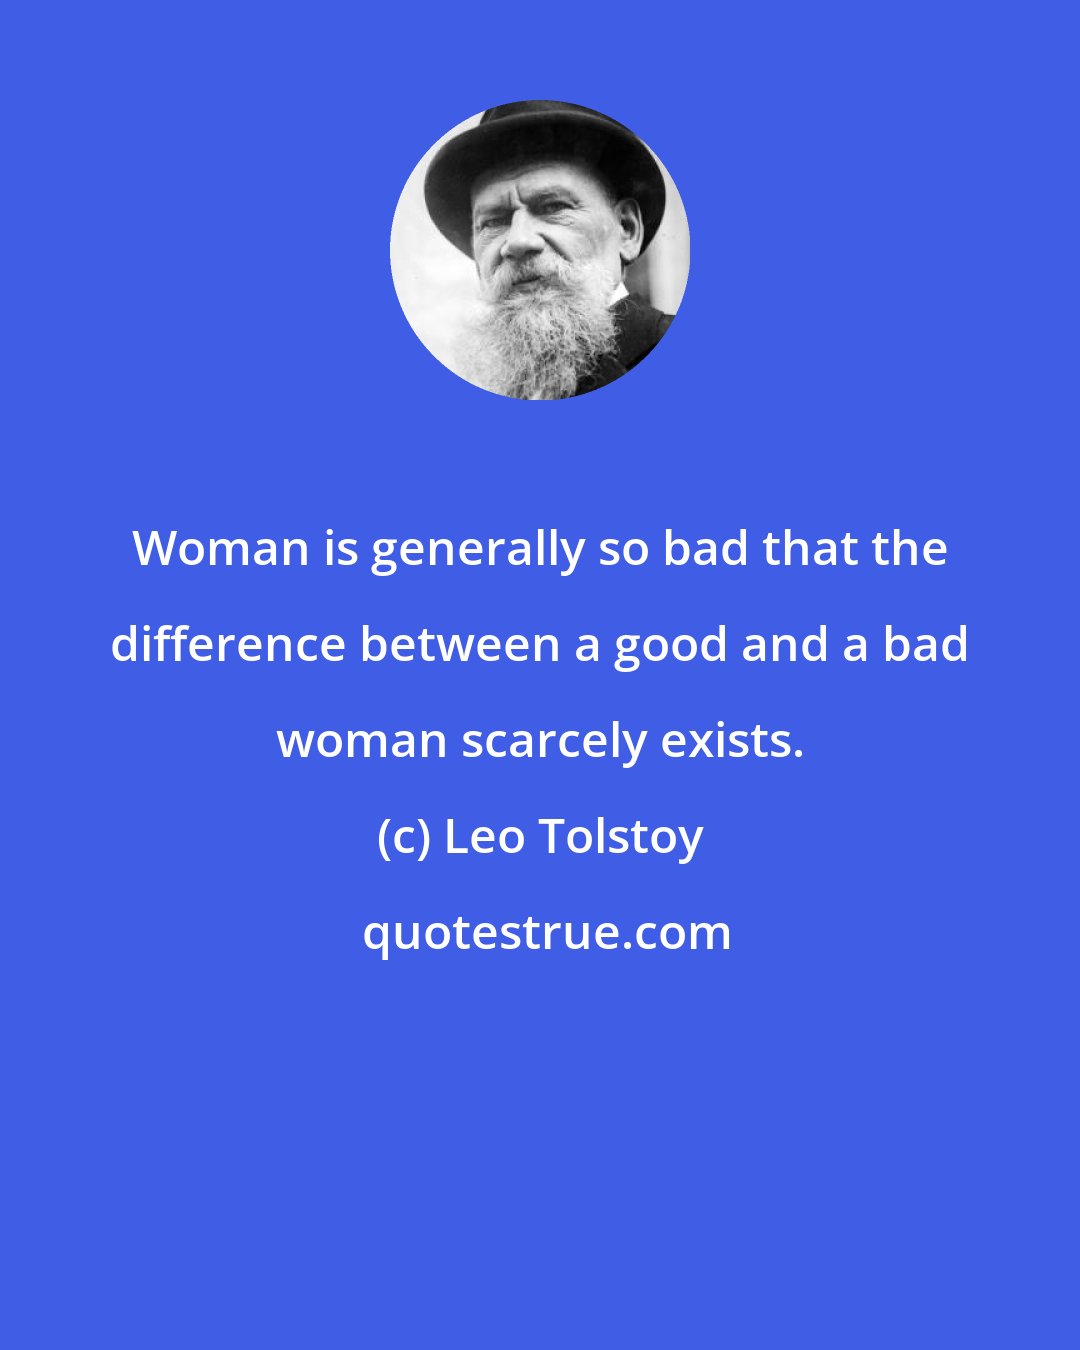 Leo Tolstoy: Woman is generally so bad that the difference between a good and a bad woman scarcely exists.